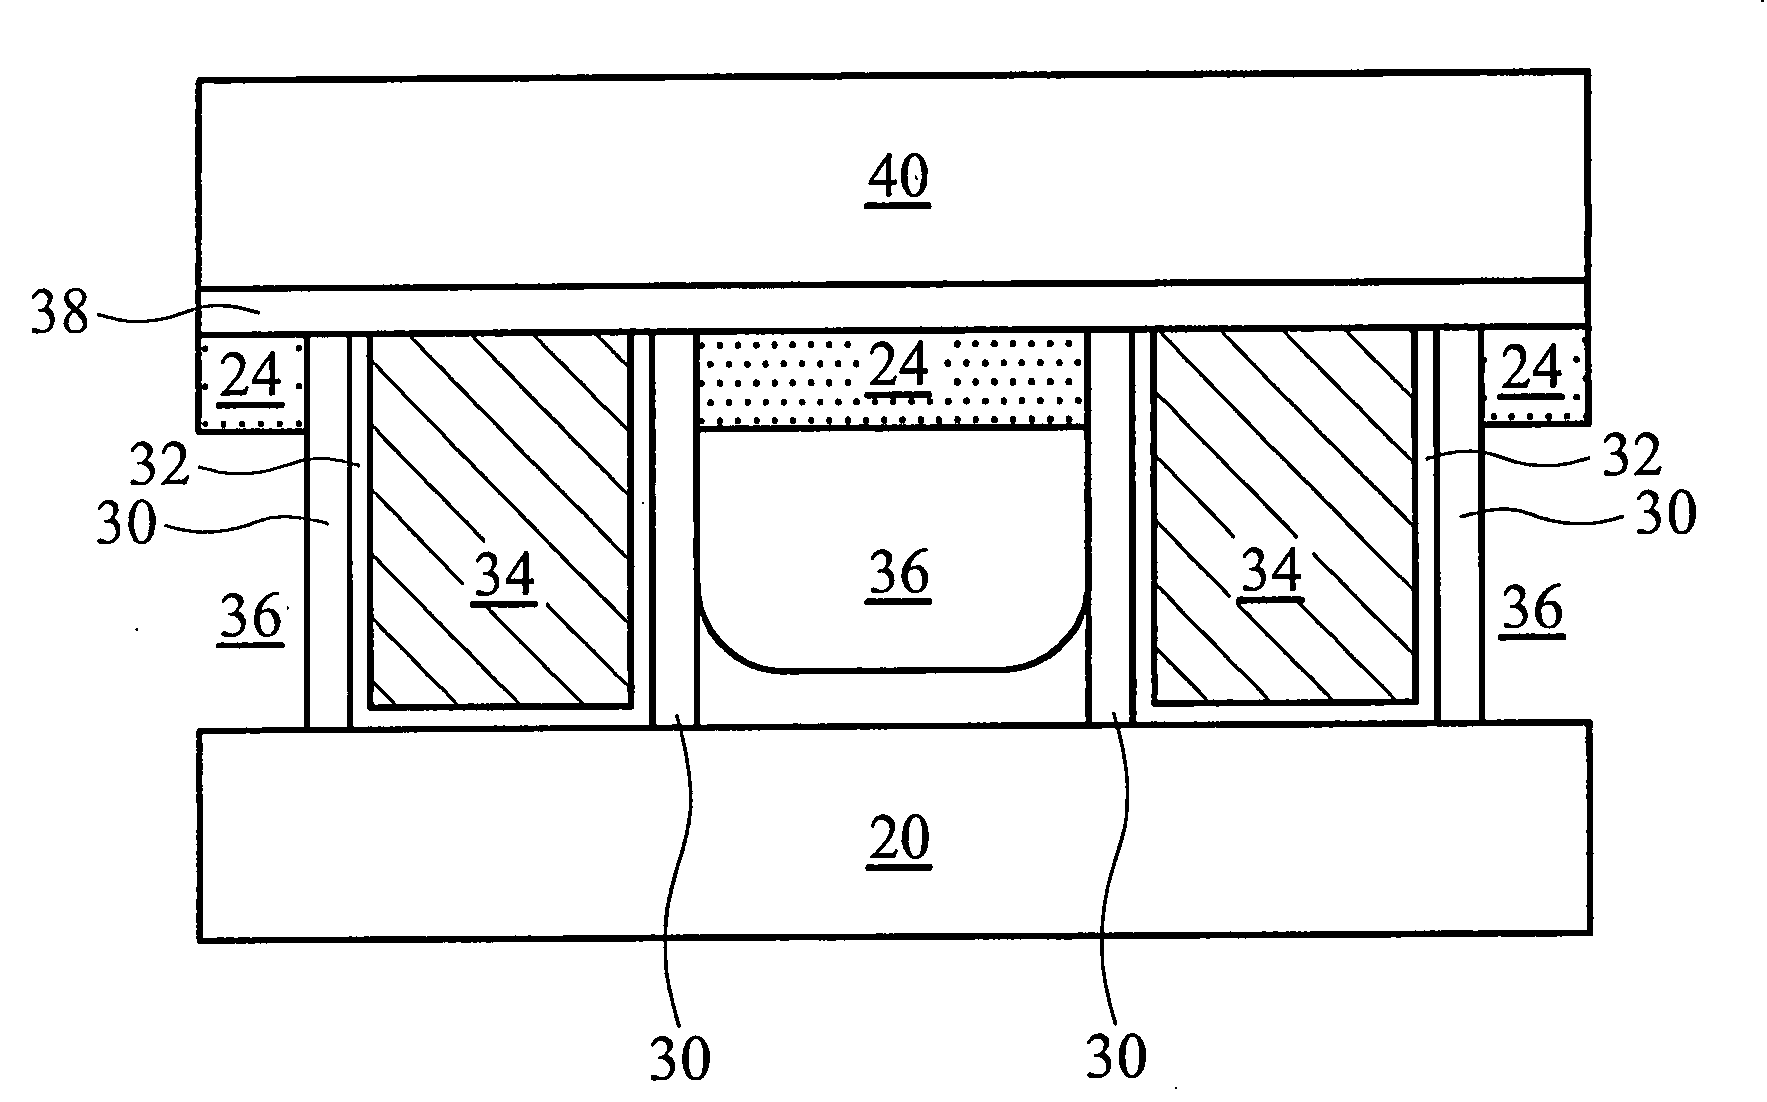 Formation process of interconnect structures with air-gaps and sidewall spacers